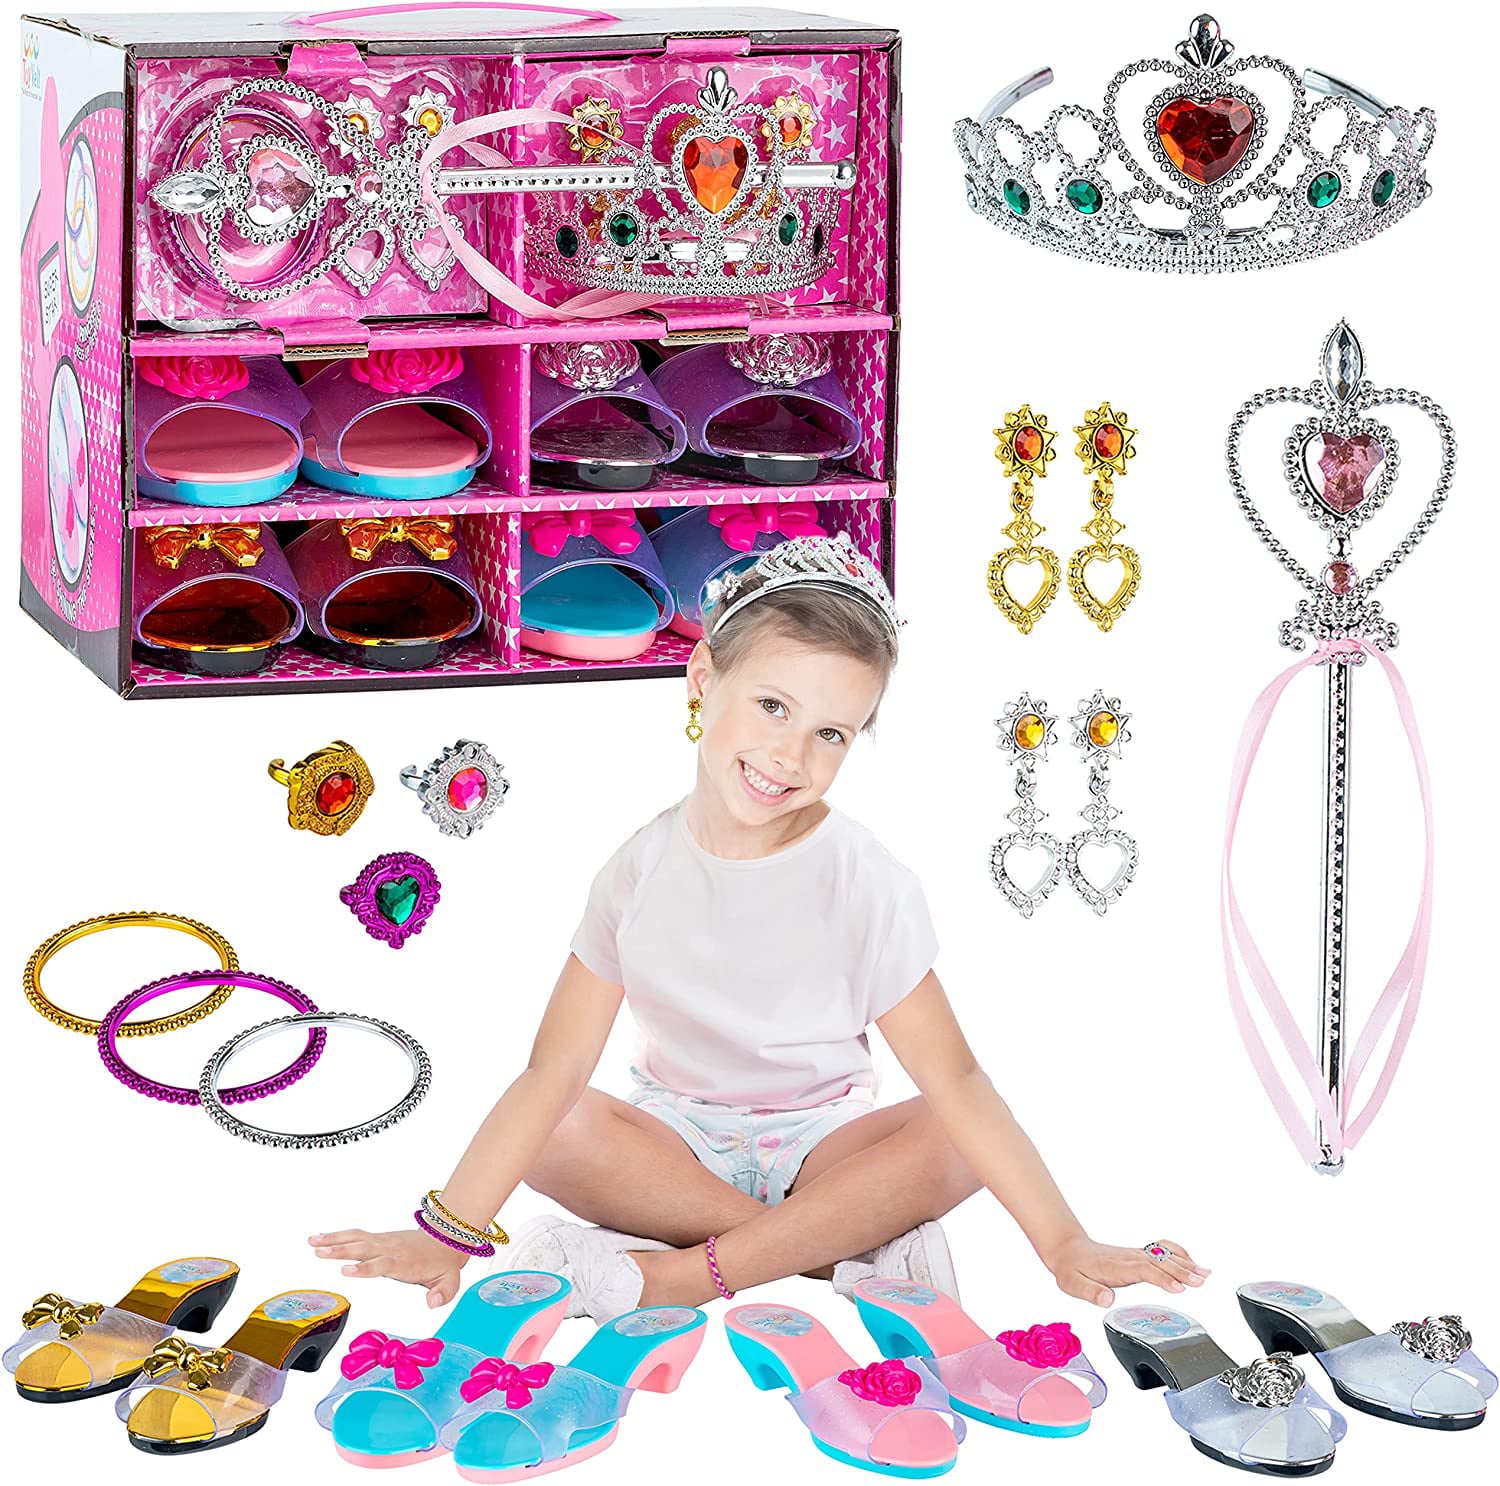 ToyVelt Princess Up & Play Shoe Jewelry Boutique Pairs of Shoes + Multiple Fashion Accessories) Best Toys for 3, 4, Year Old Girls and Up - Walmart.com